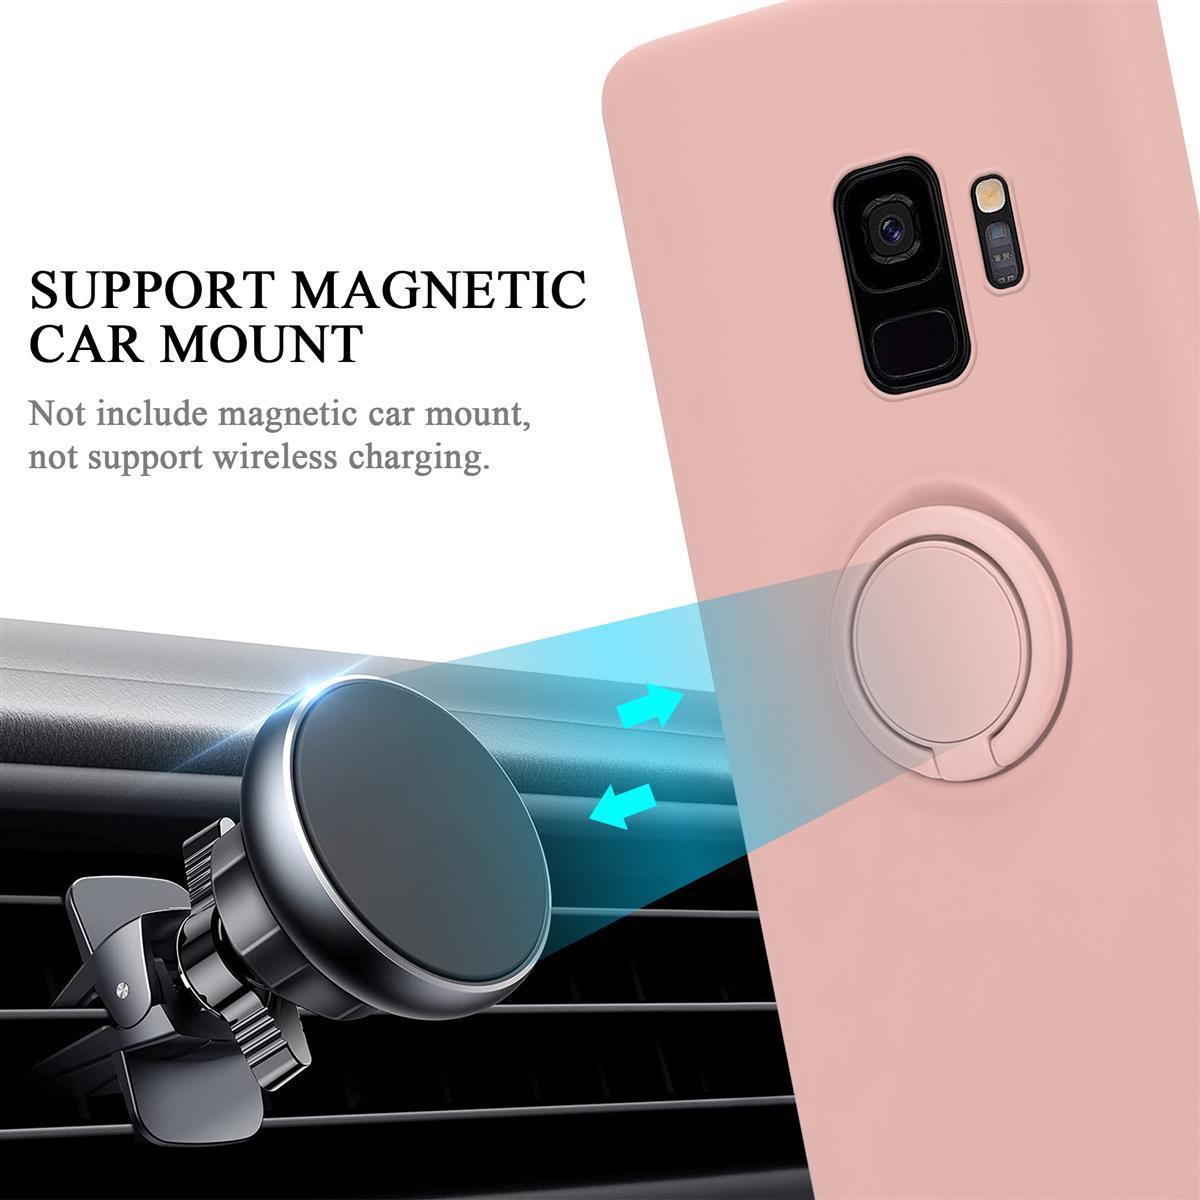 im PINK Ring Hülle Galaxy Silicone S9, Style, LIQUID Case Samsung, CADORABO Backcover, Liquid